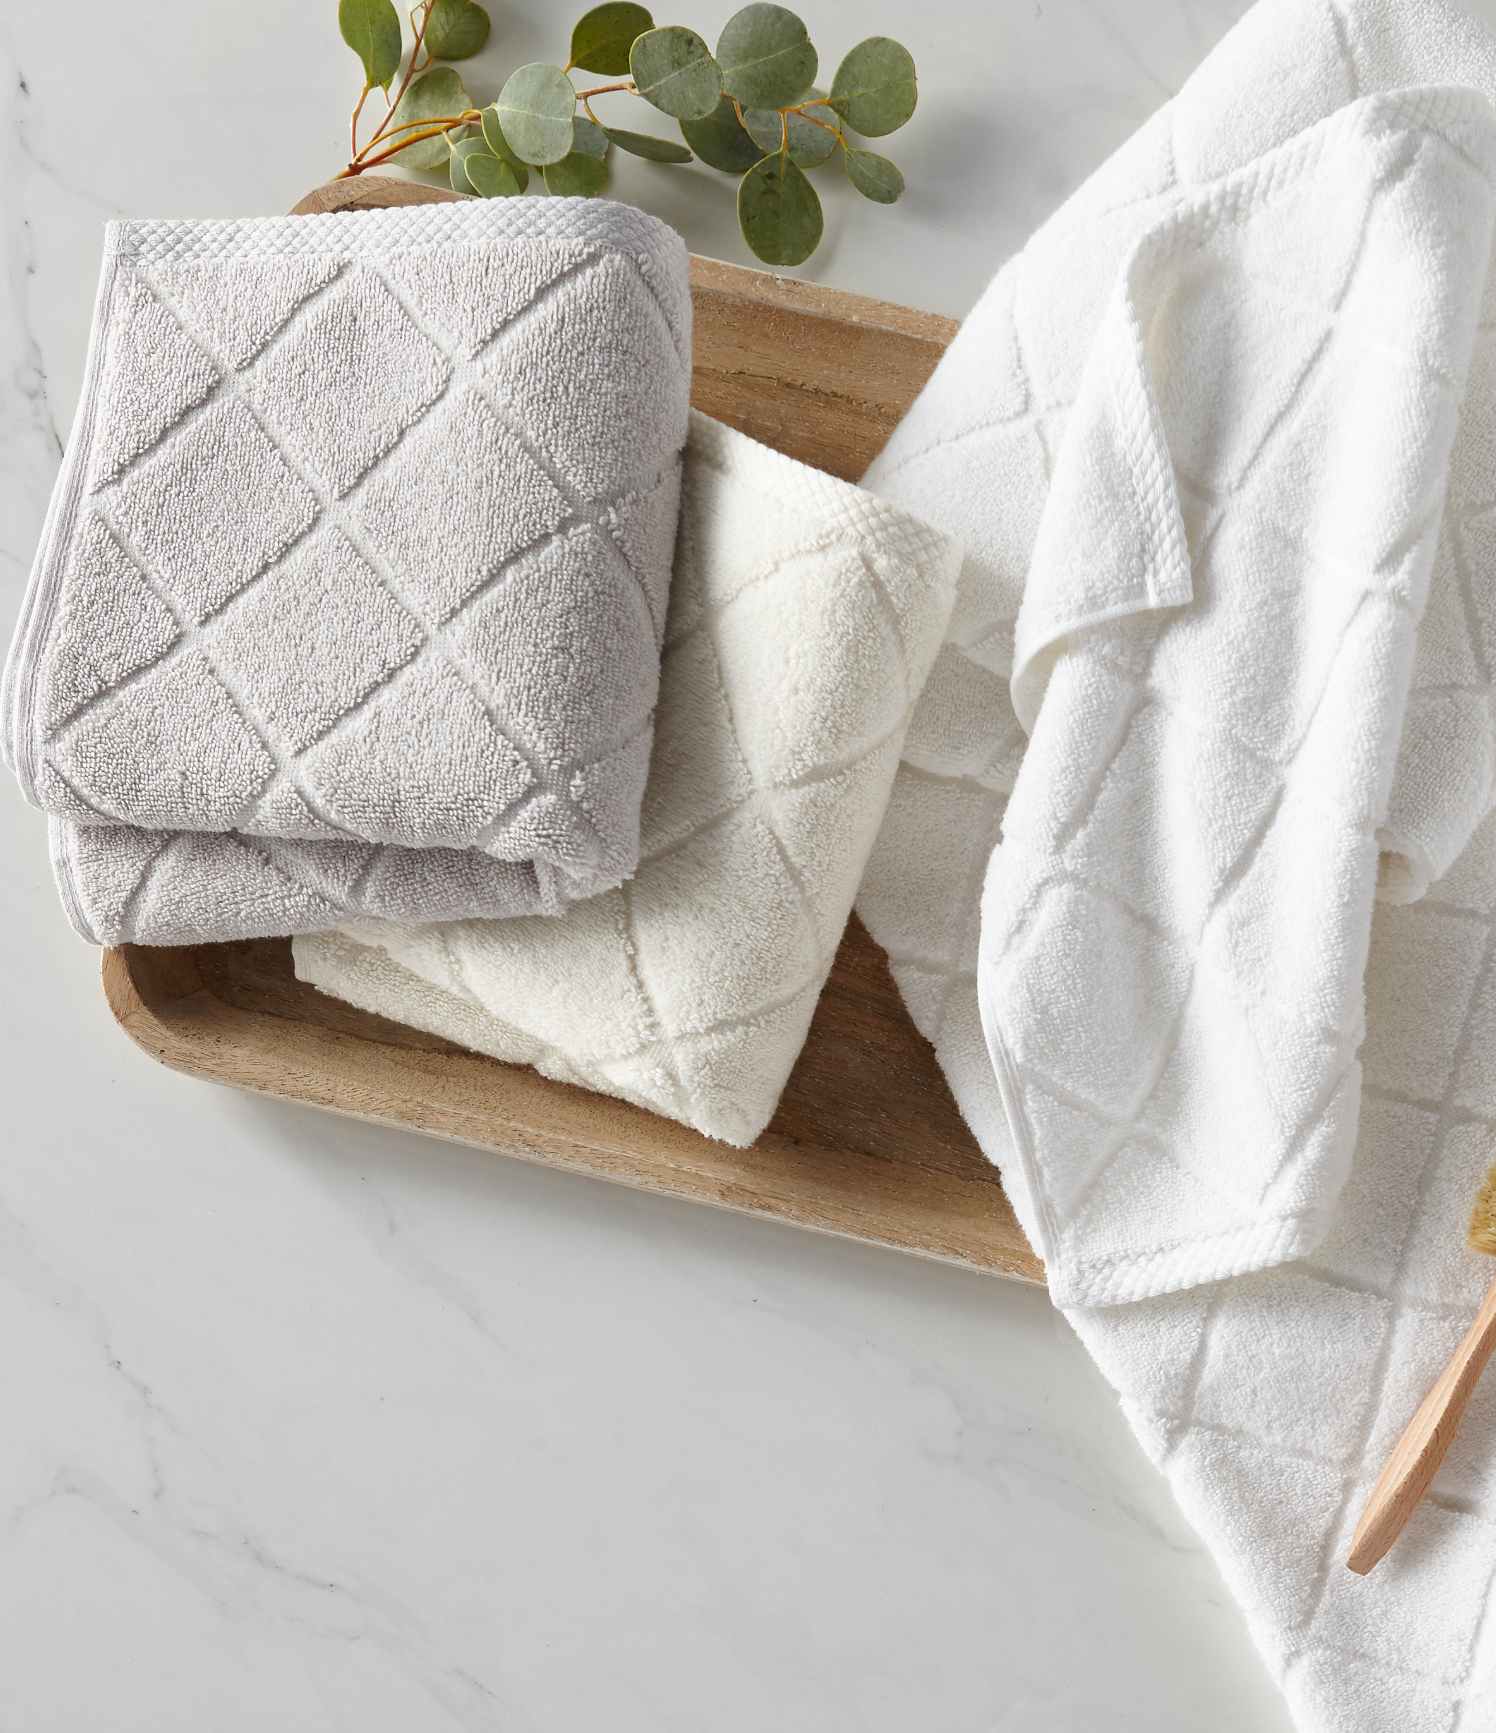 How to Identify and Choose High Quality Bath Towels: 4 Steps